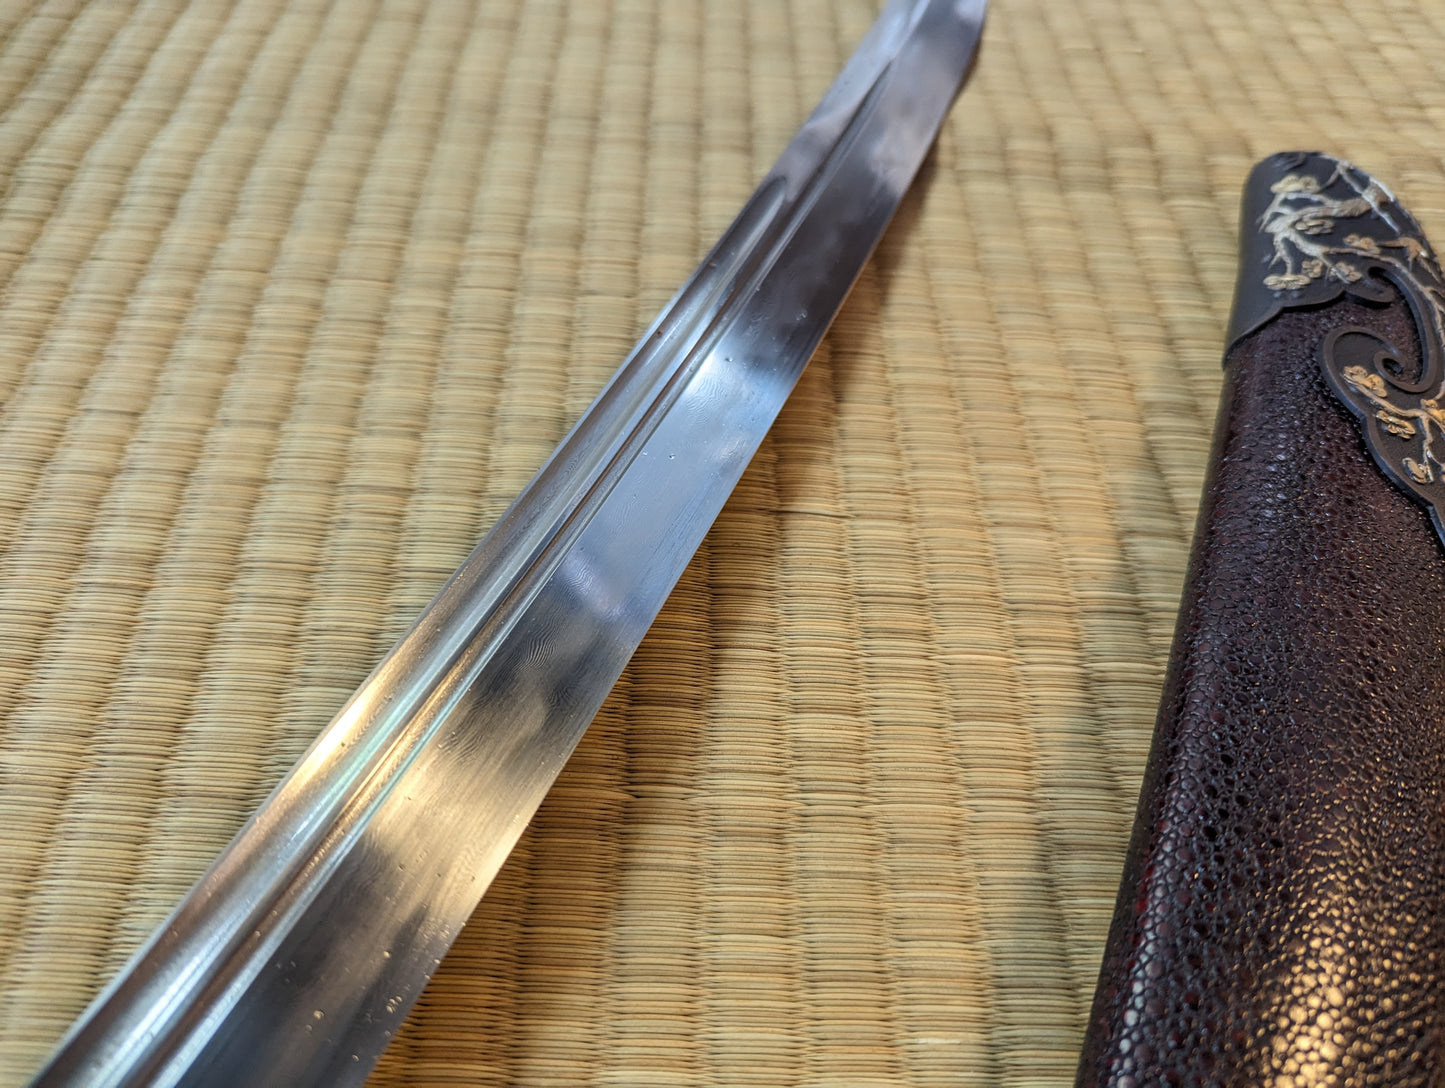 Ming Saber- Plum Fittings, Clay Tempered Damascus Steel